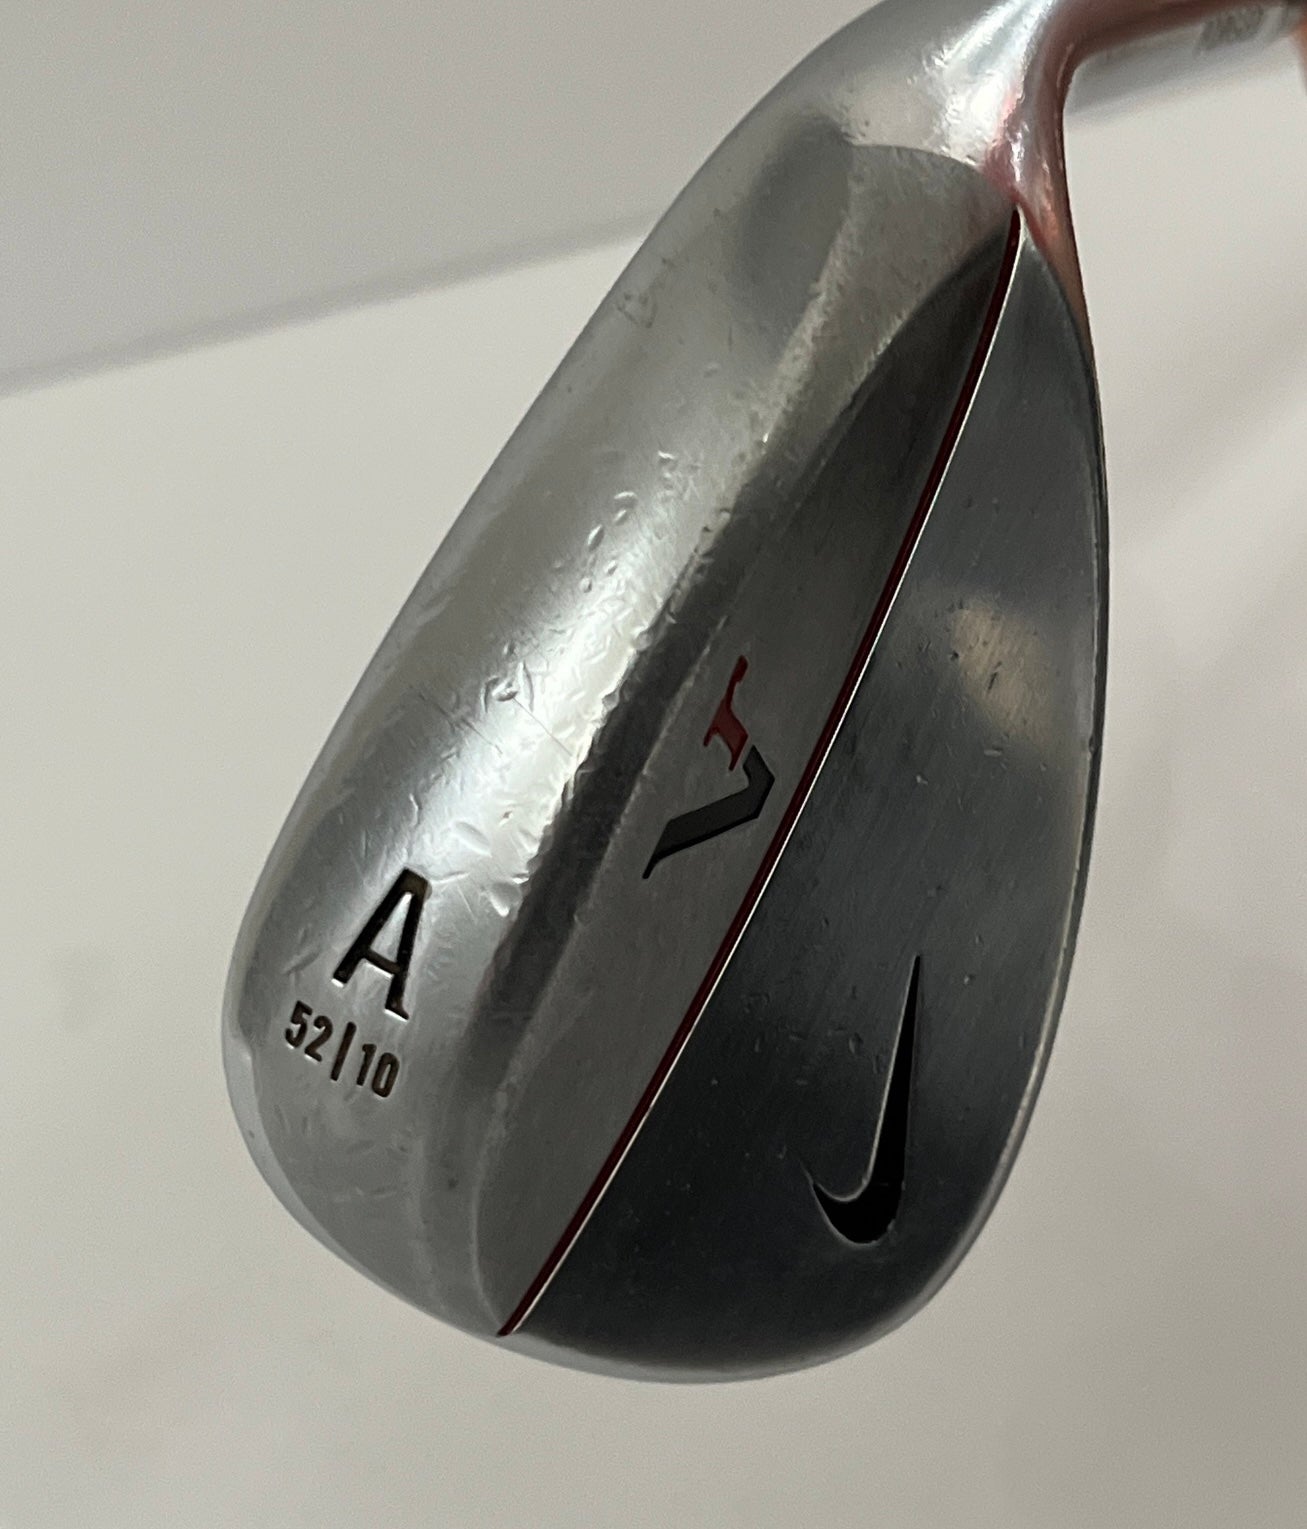 Nike VR Forged Tour Satin A 52|10 Gap Wedge Right Hand, DG Steel 